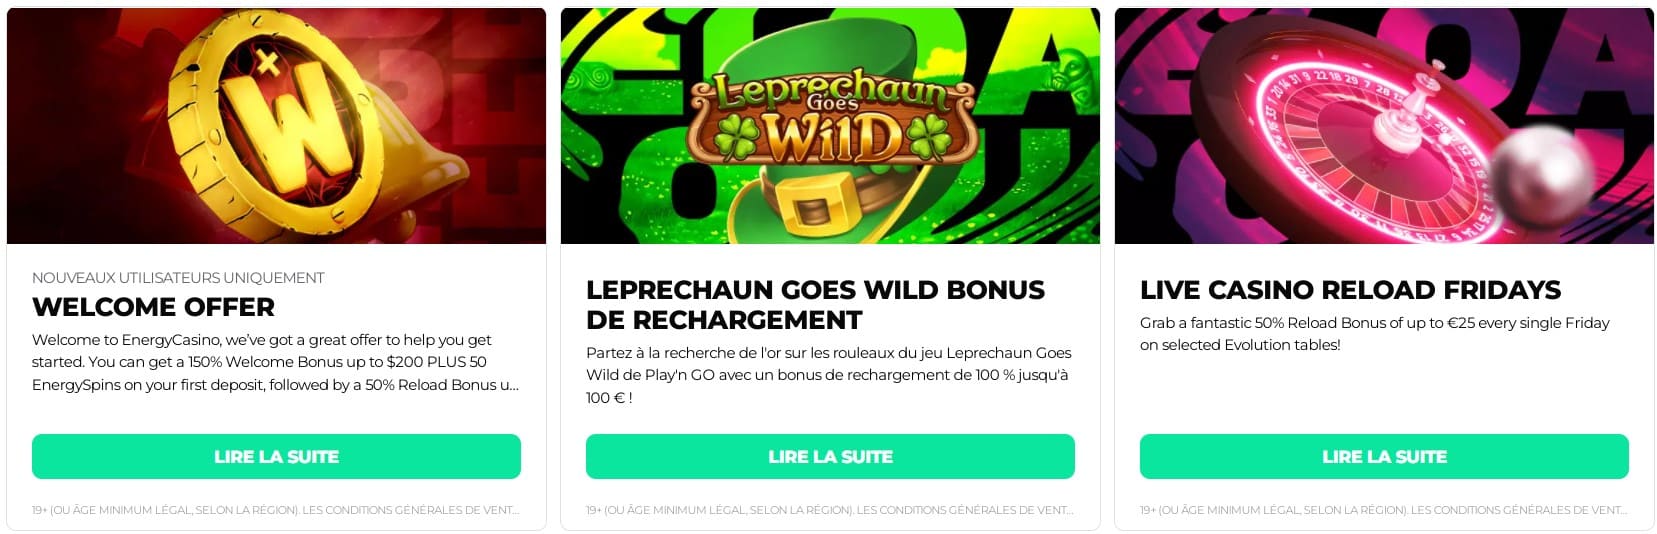 Energy casino PROMOTIONS AND TOURNAMENTS